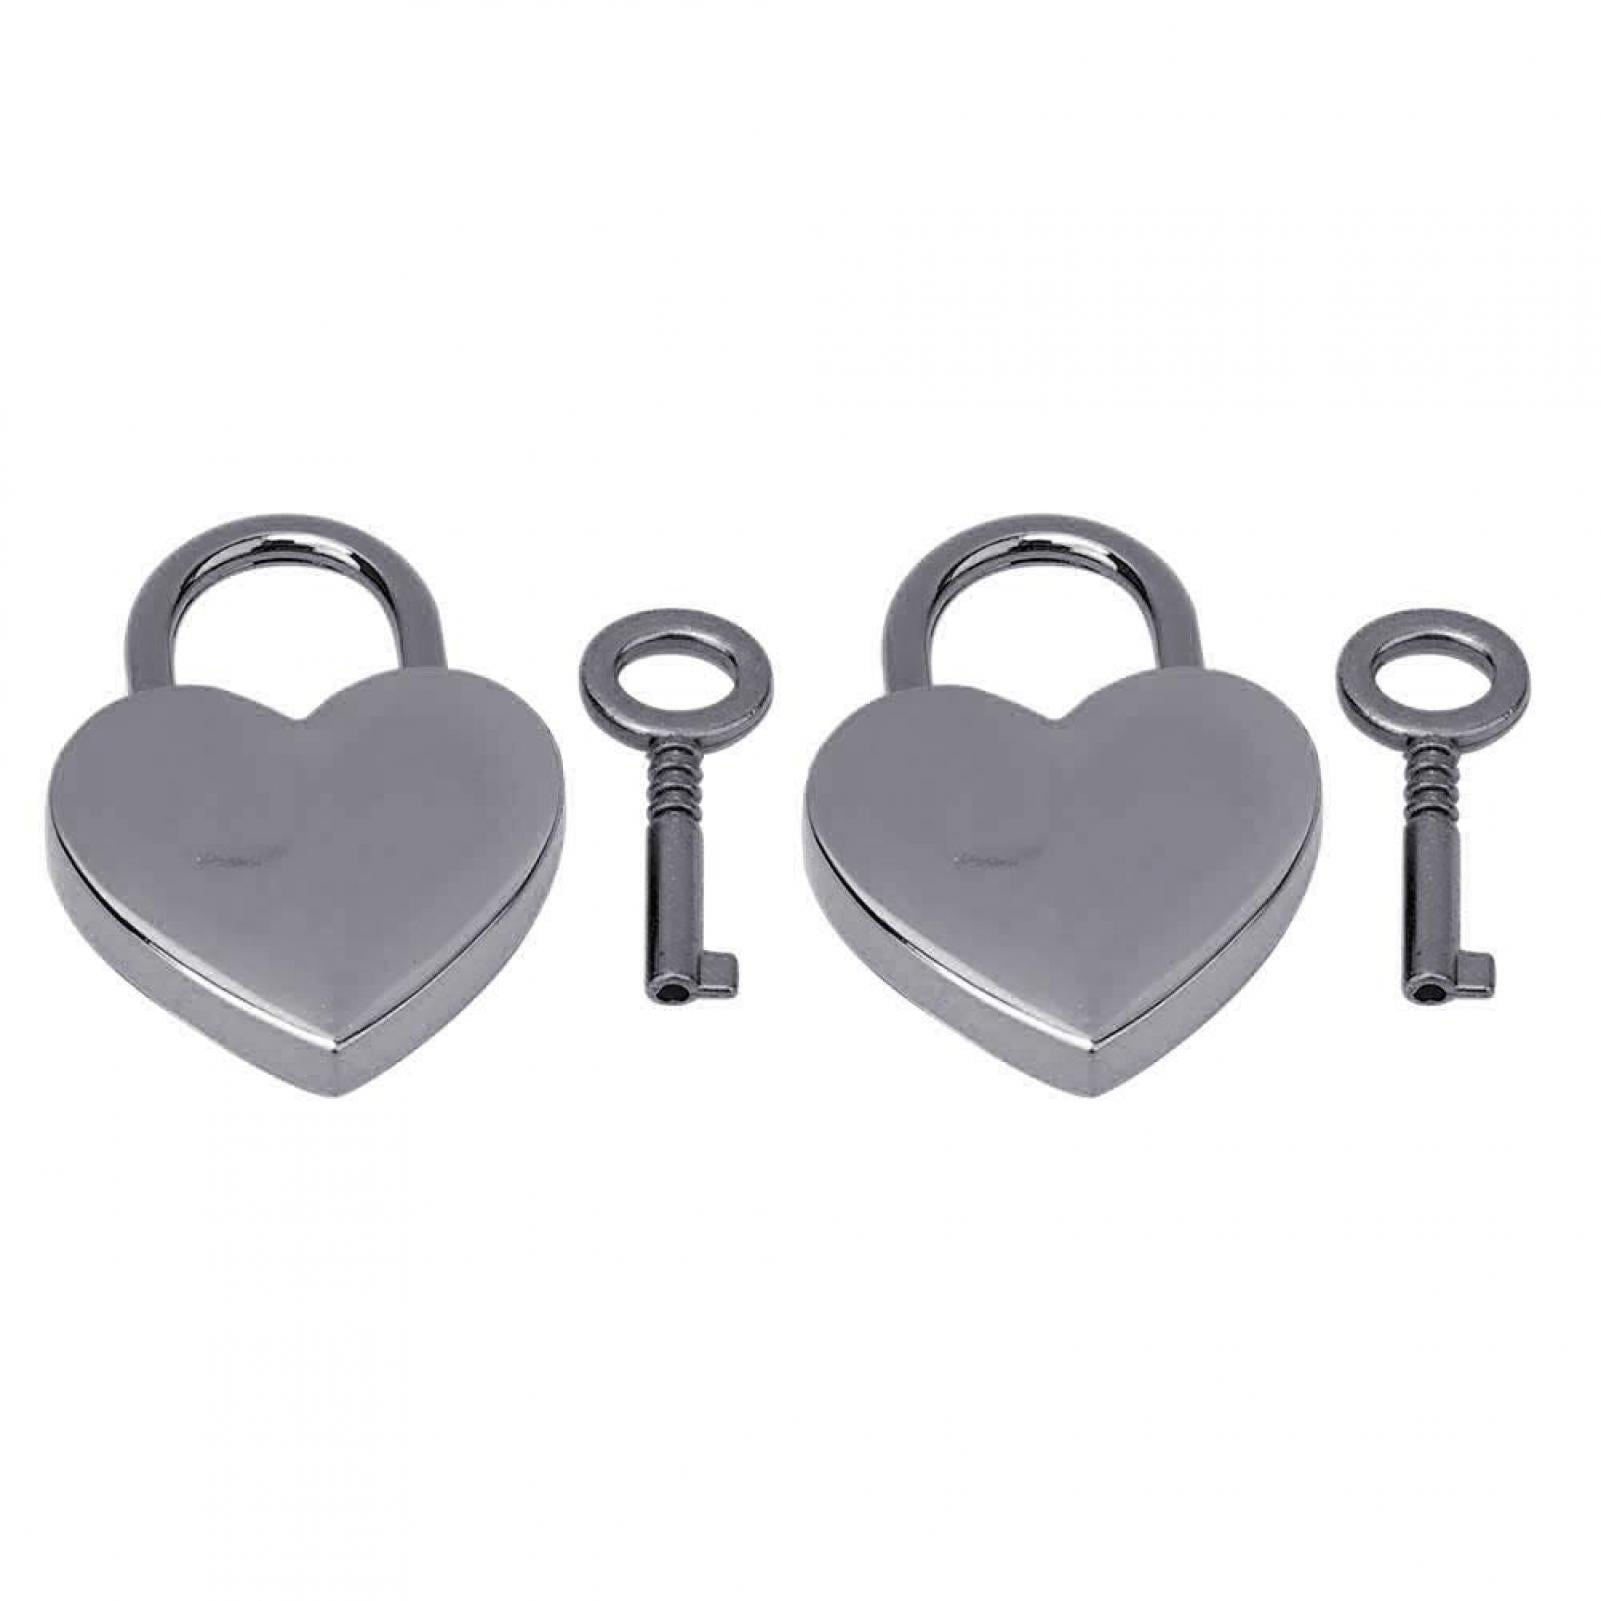 uxcell Metal Heart Shaped Suitcase Bag Security Lock Padlock Silver Tone 